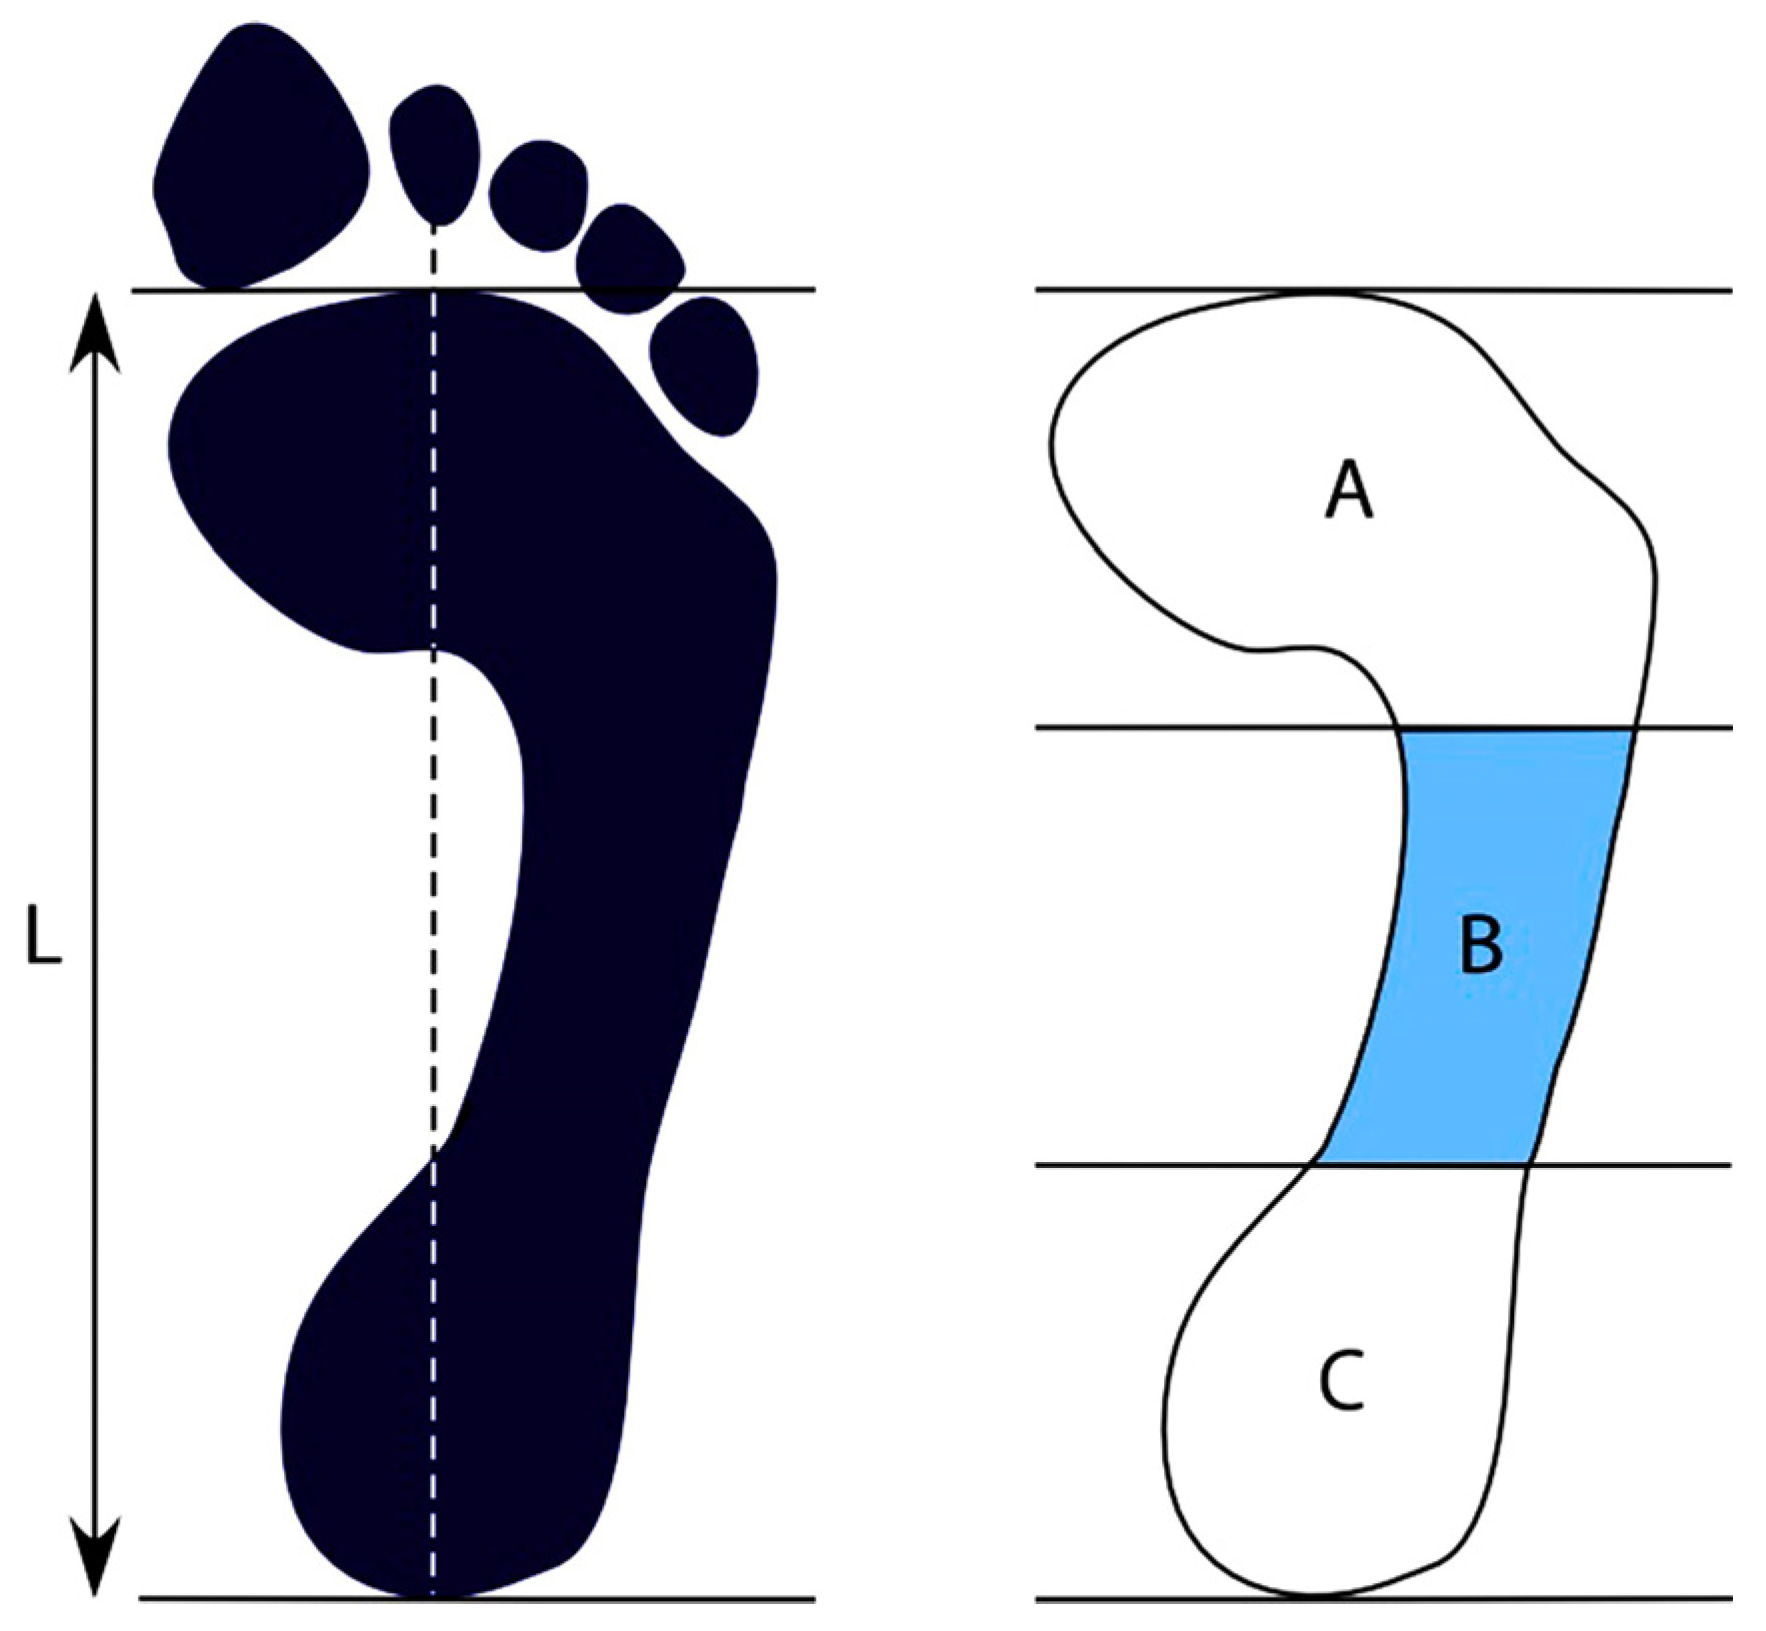 Importance of plantar flexion – Proactive Physio Knowledge